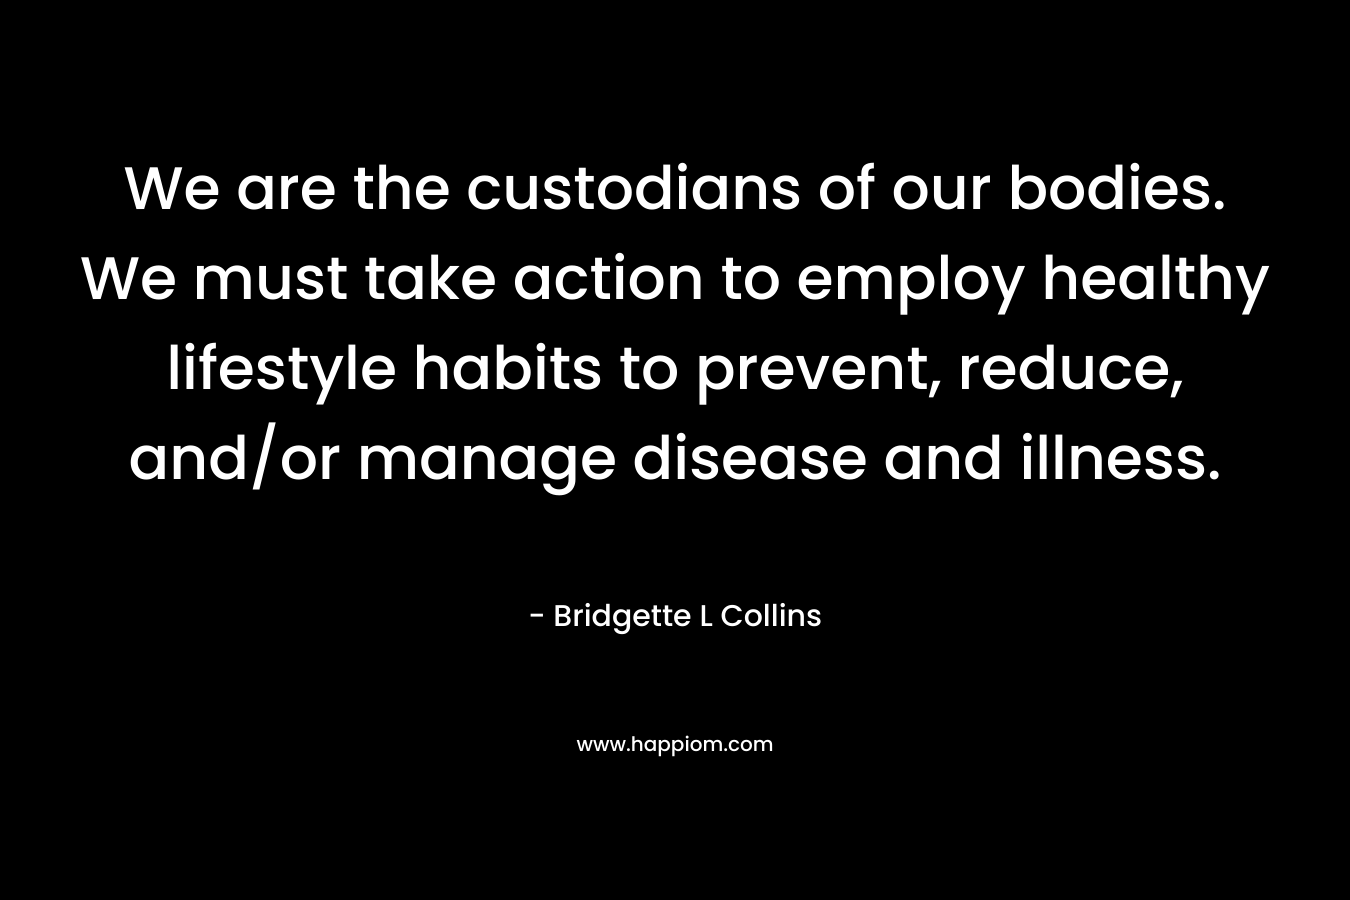 We are the custodians of our bodies. We must take action to employ healthy lifestyle habits to prevent, reduce, and/or manage disease and illness.